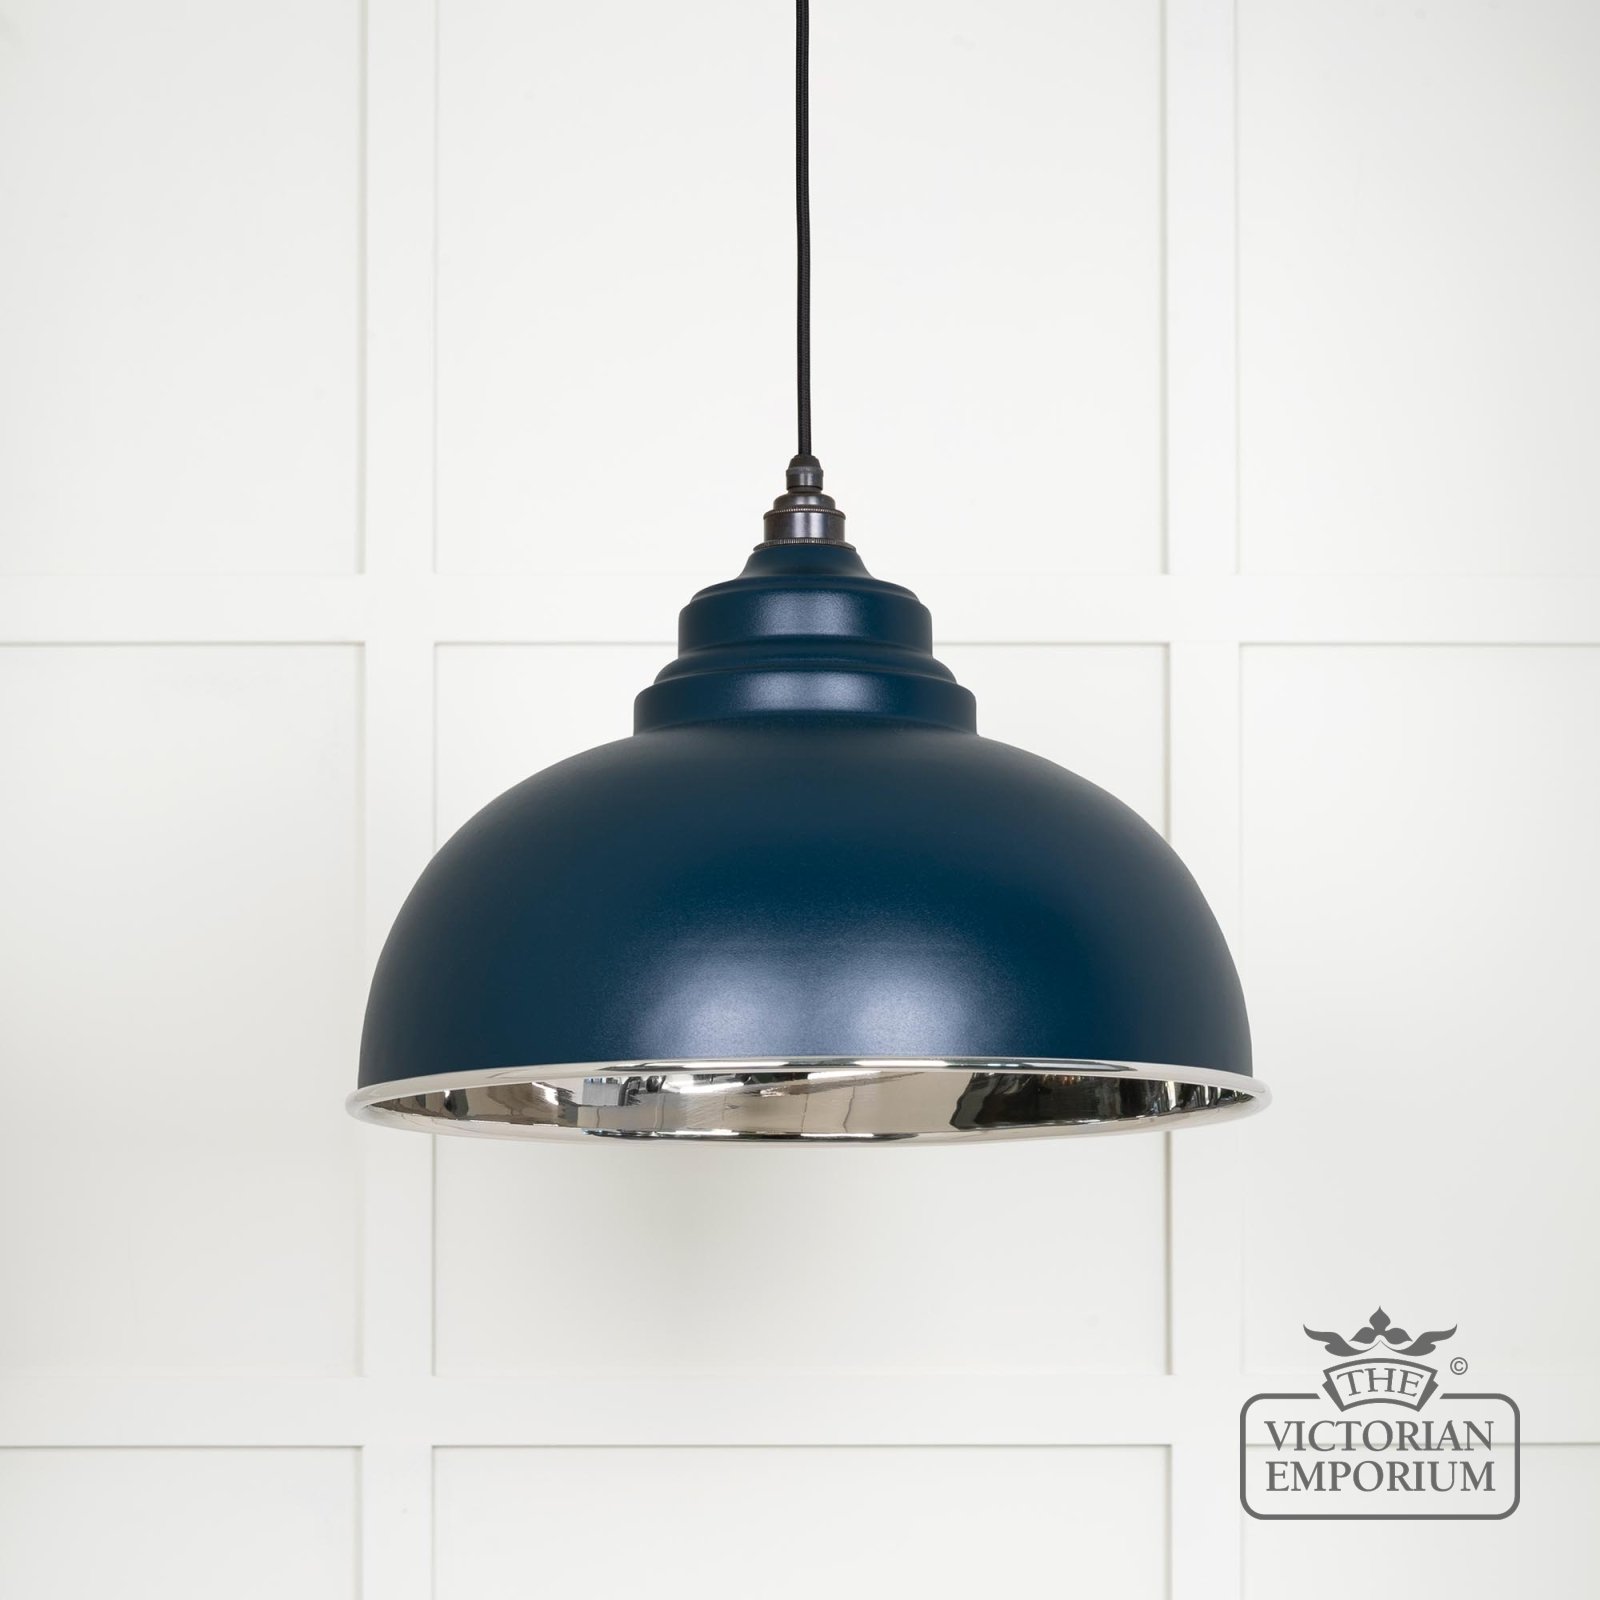 Harlow pendant light in smooth nickel with Dusk exterior